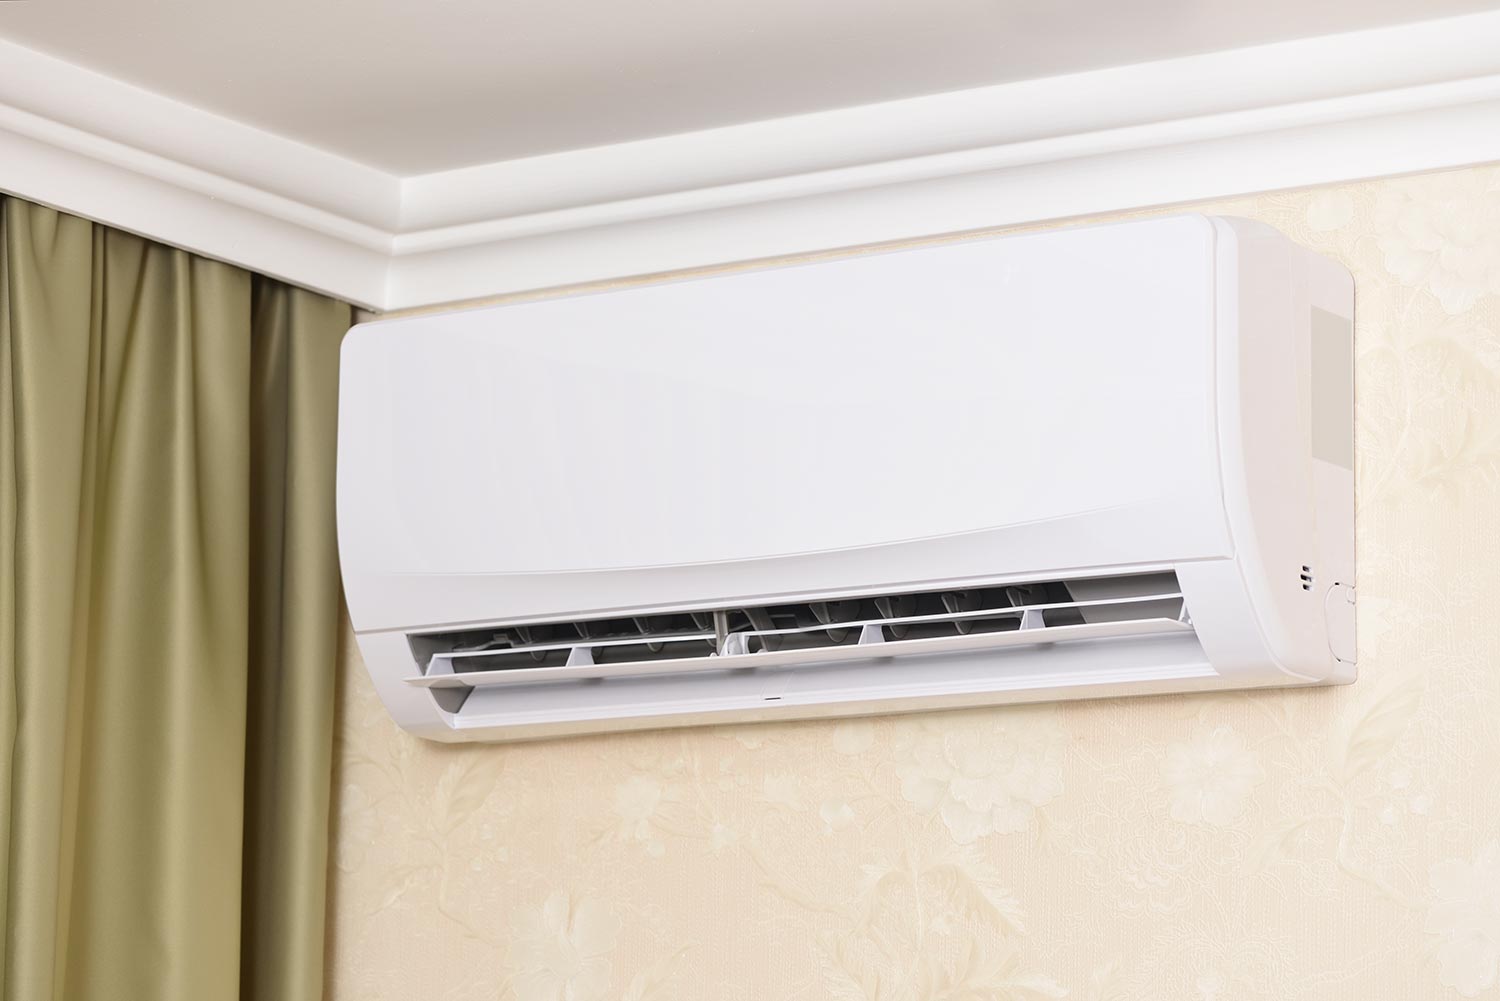 Air conditioner installed at home on the wall under the ceiling